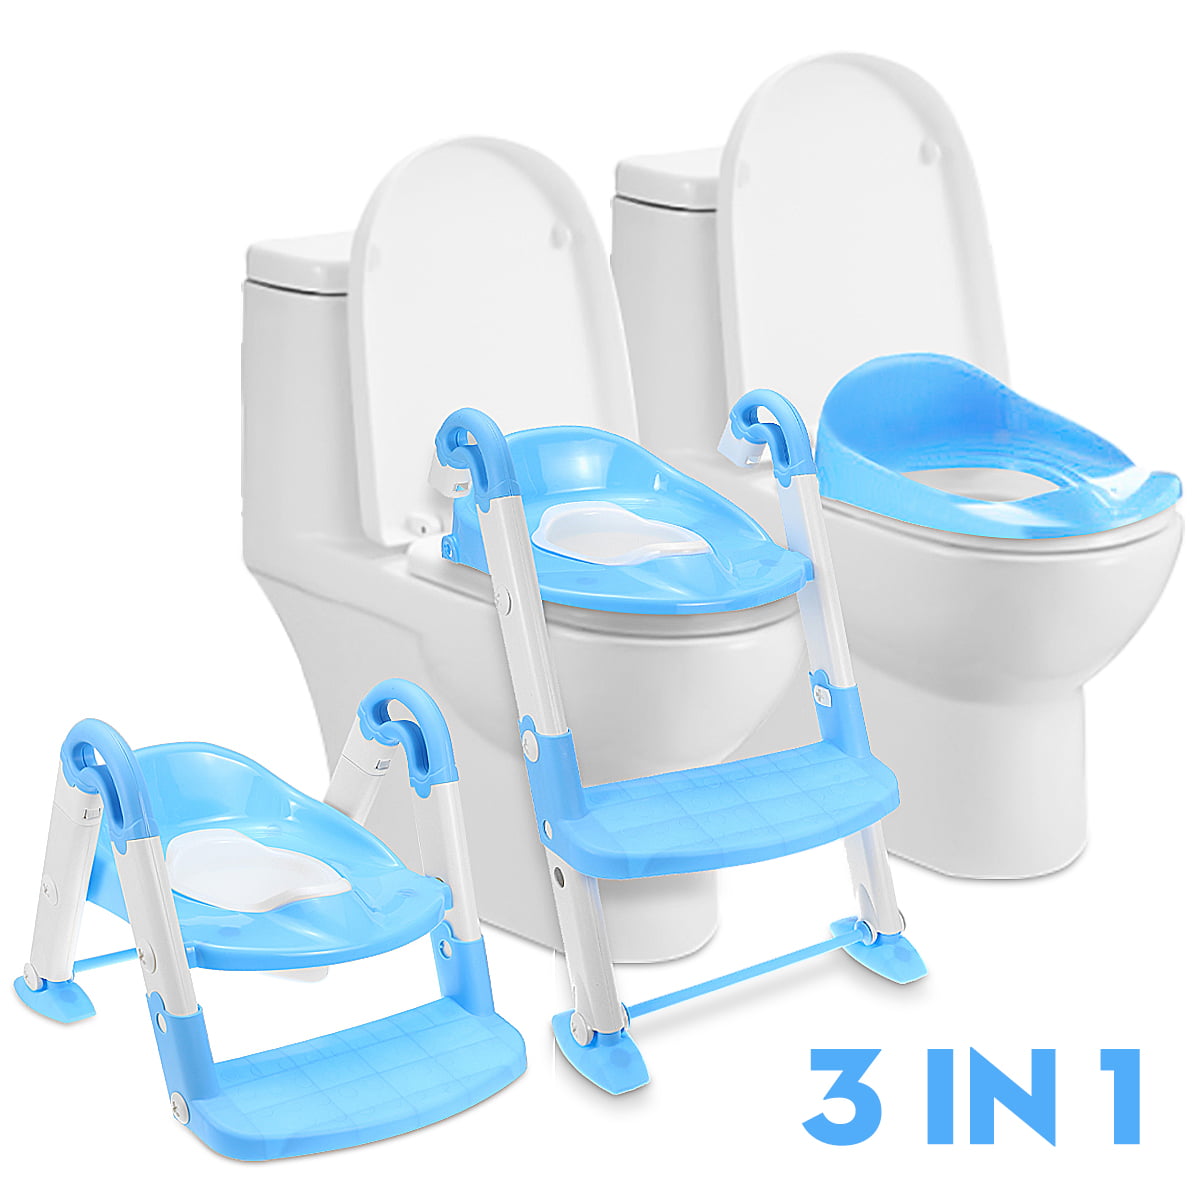 Soft Cushion Sturdy Seat SNAN Kid Toilet Ladder Green Comfortable Handles and Non-Slip Wide Steps for Girls and Boys Baby Using Adjustable Potty Training Toddler Stool with Step Ladder